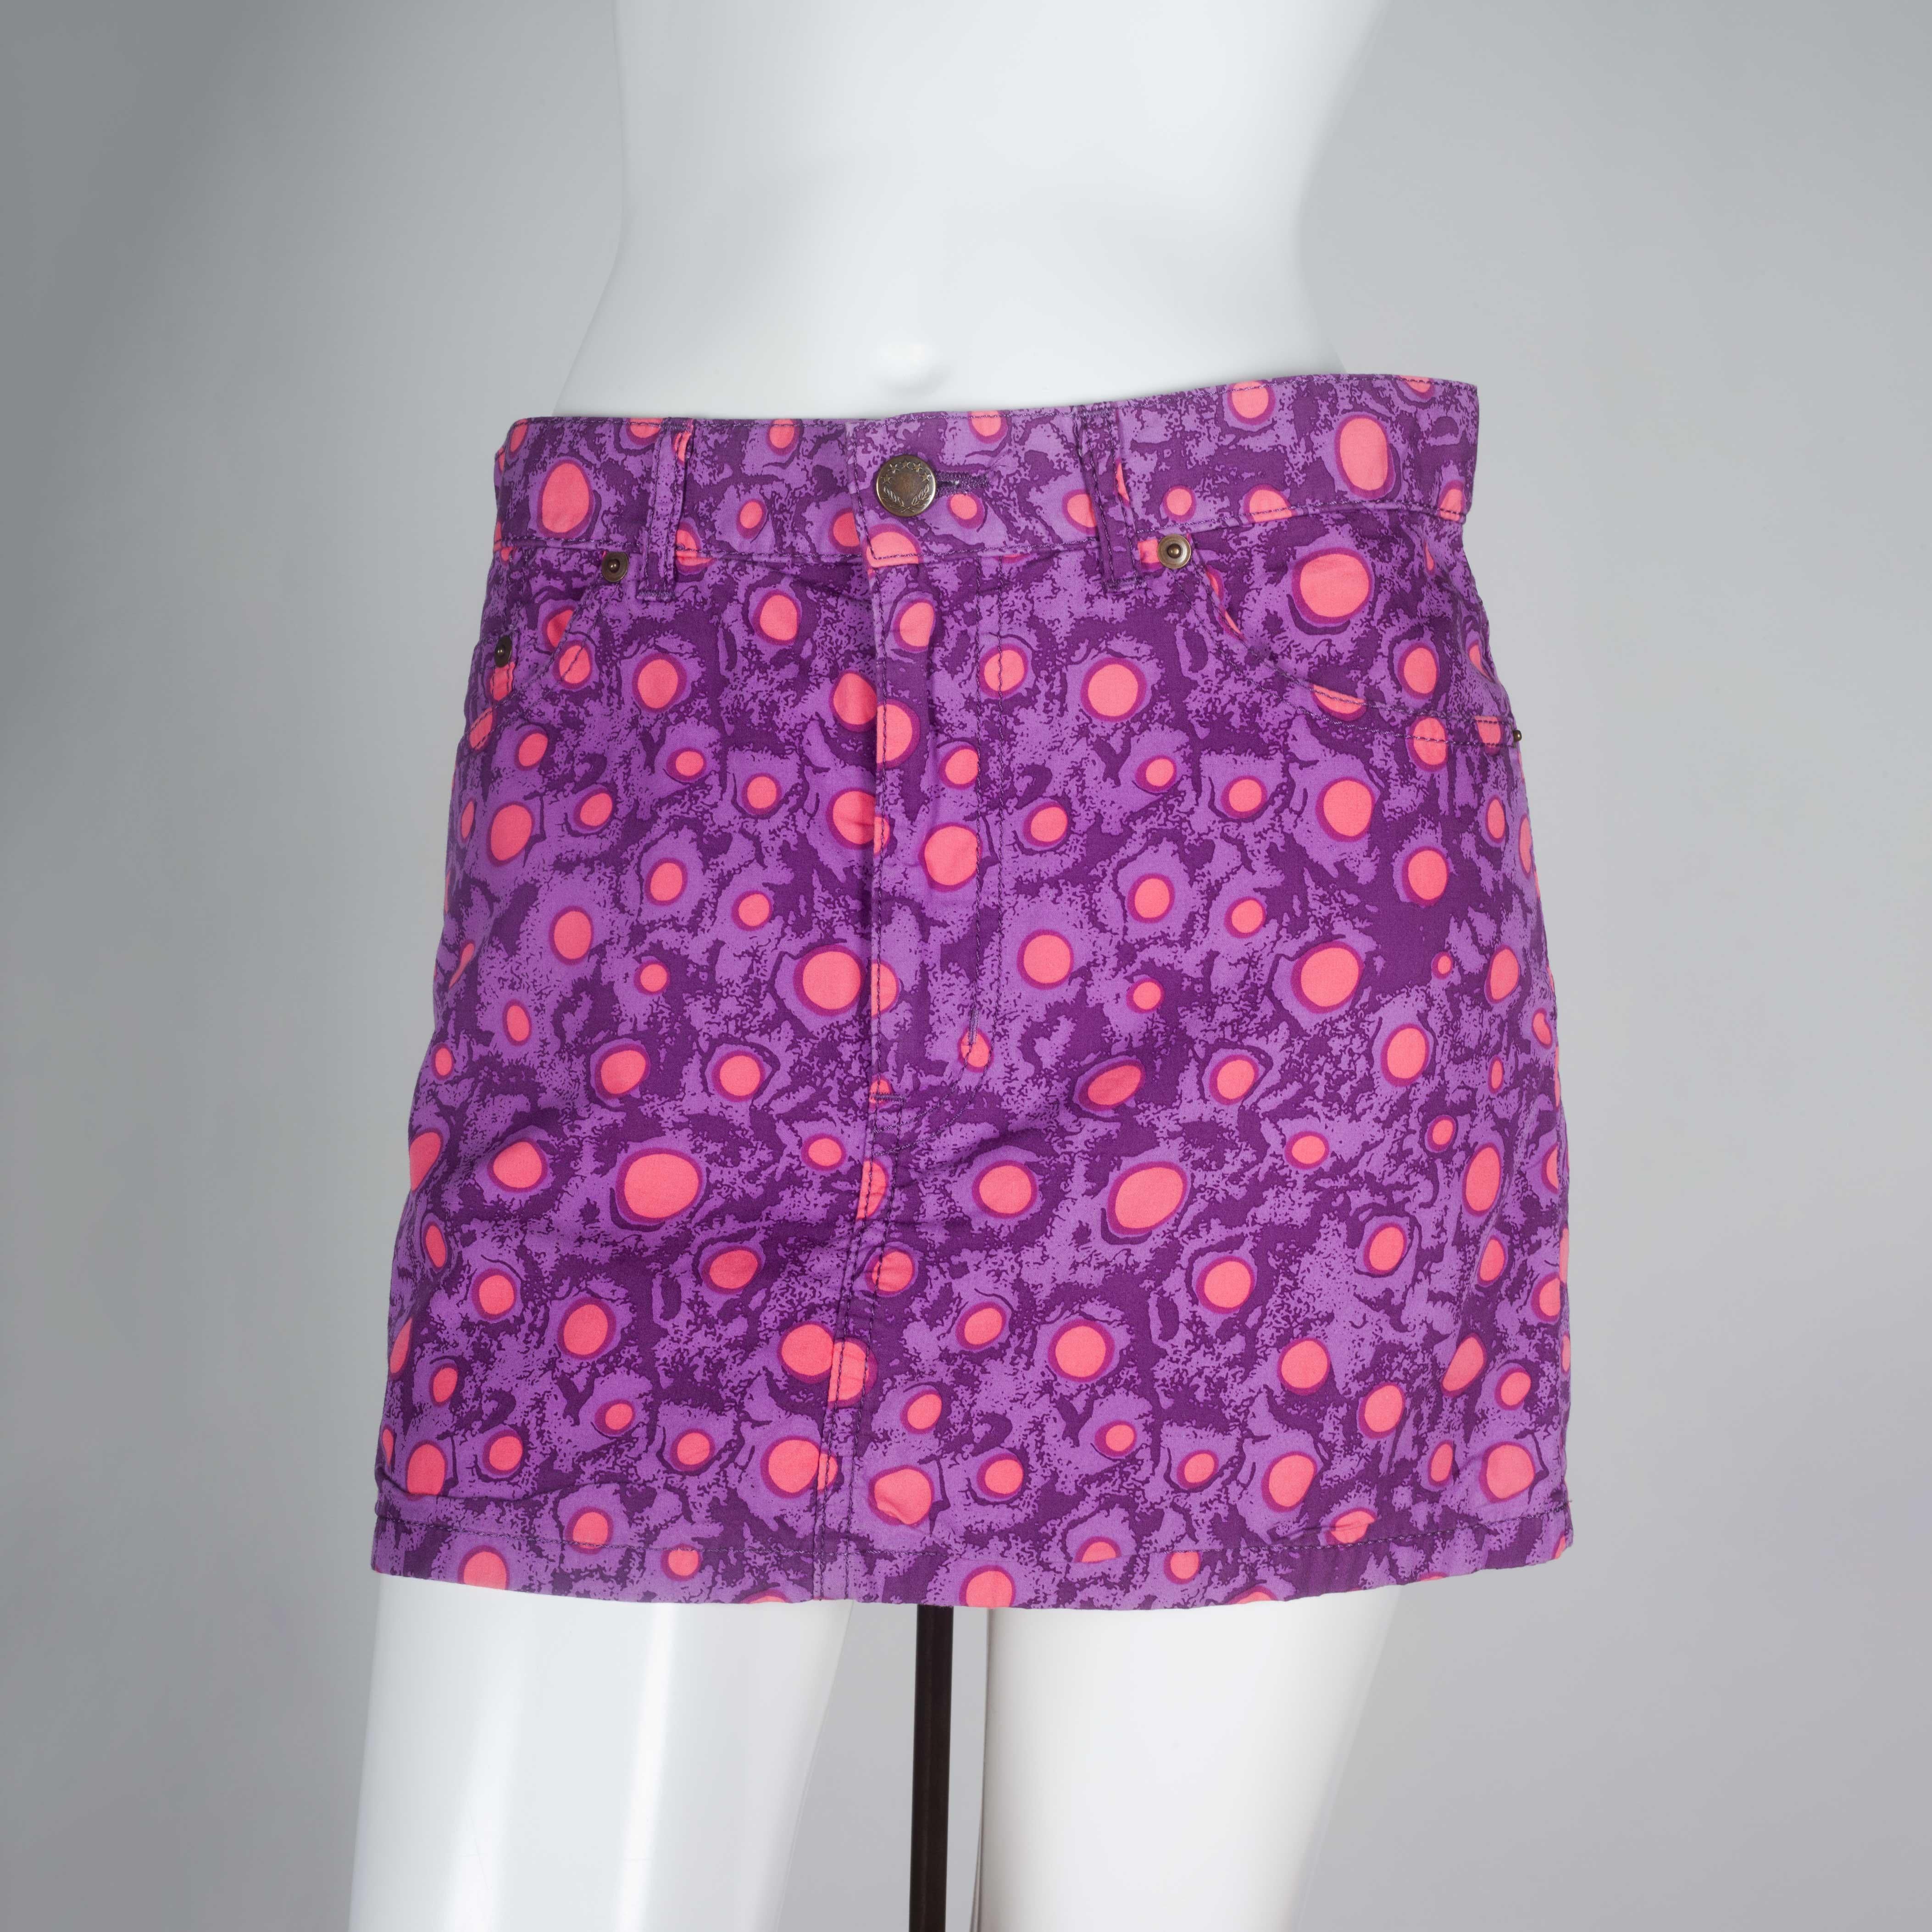 Comme des Garçons Tao 2009 cotton mini skirt in two shades of purple and playful, bright pink circles motif. Cotton lining, pockets, and visible stitching.  

YEAR: 2009
MARKED SIZE: S
US WOMEN'S: M
US MEN'S: S
FIT: Regular
WAIST: 15.5